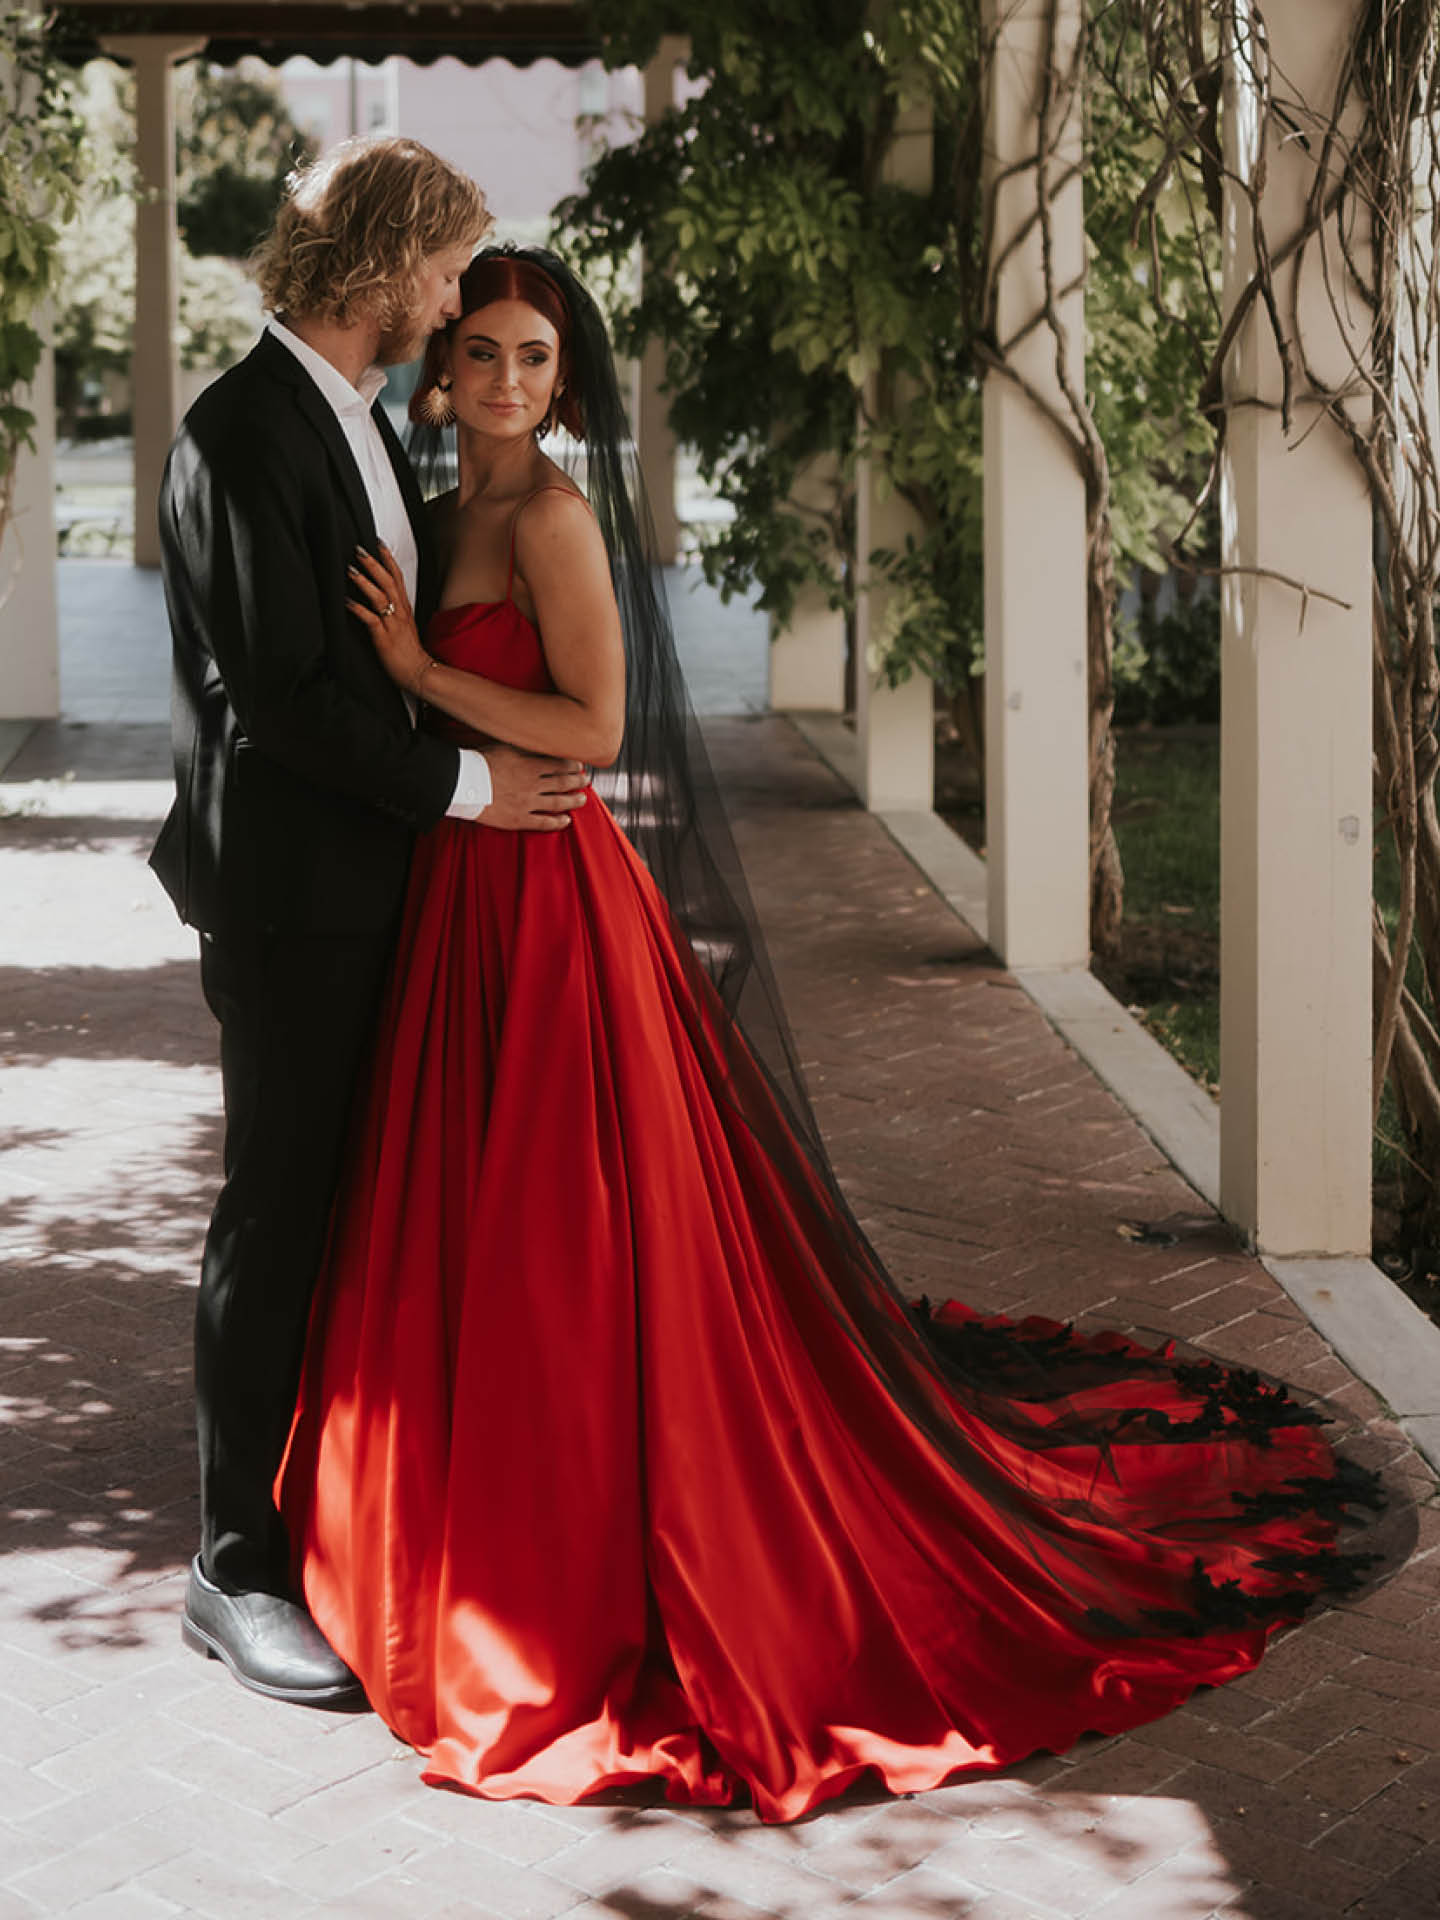 Red Wedding Dress with tail Ball Gown Lace Style Embroidery Bridal Gown  Wedding Dresses (Color : Trailing wedding dress, Size : XL code) (Floor  Length Dress S code) : Amazon.co.uk: Fashion